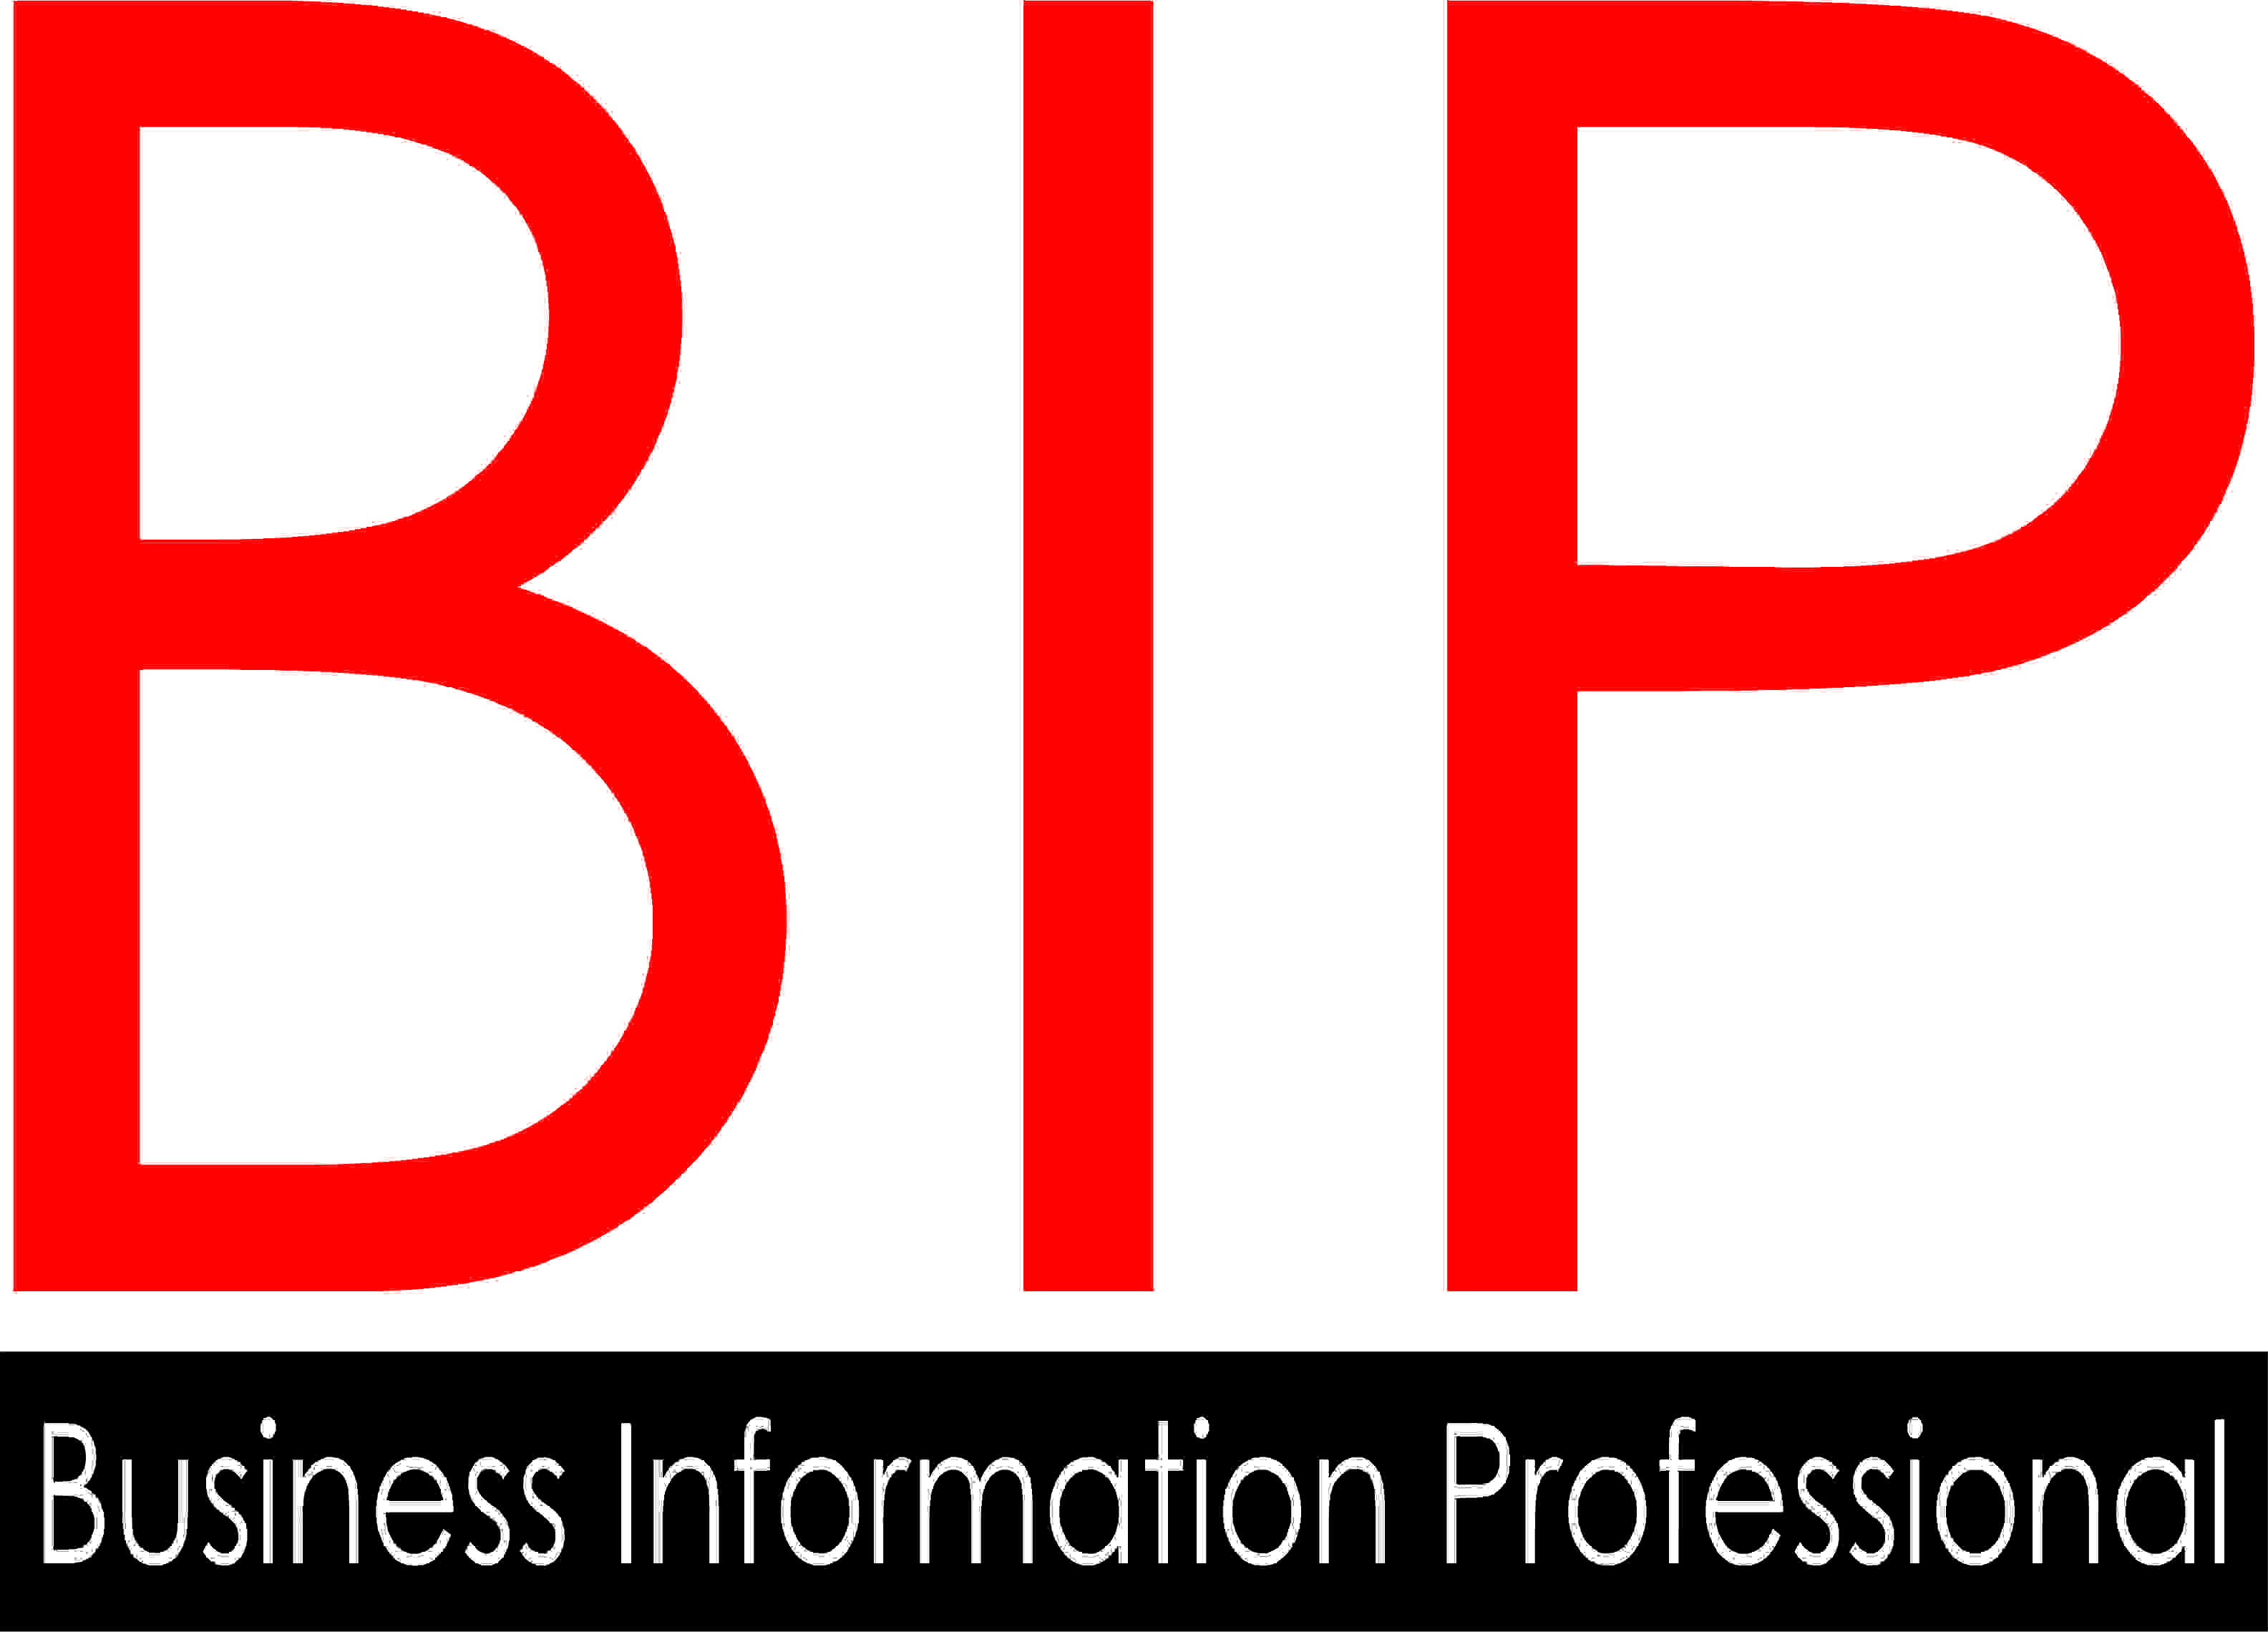 Business Information Professional